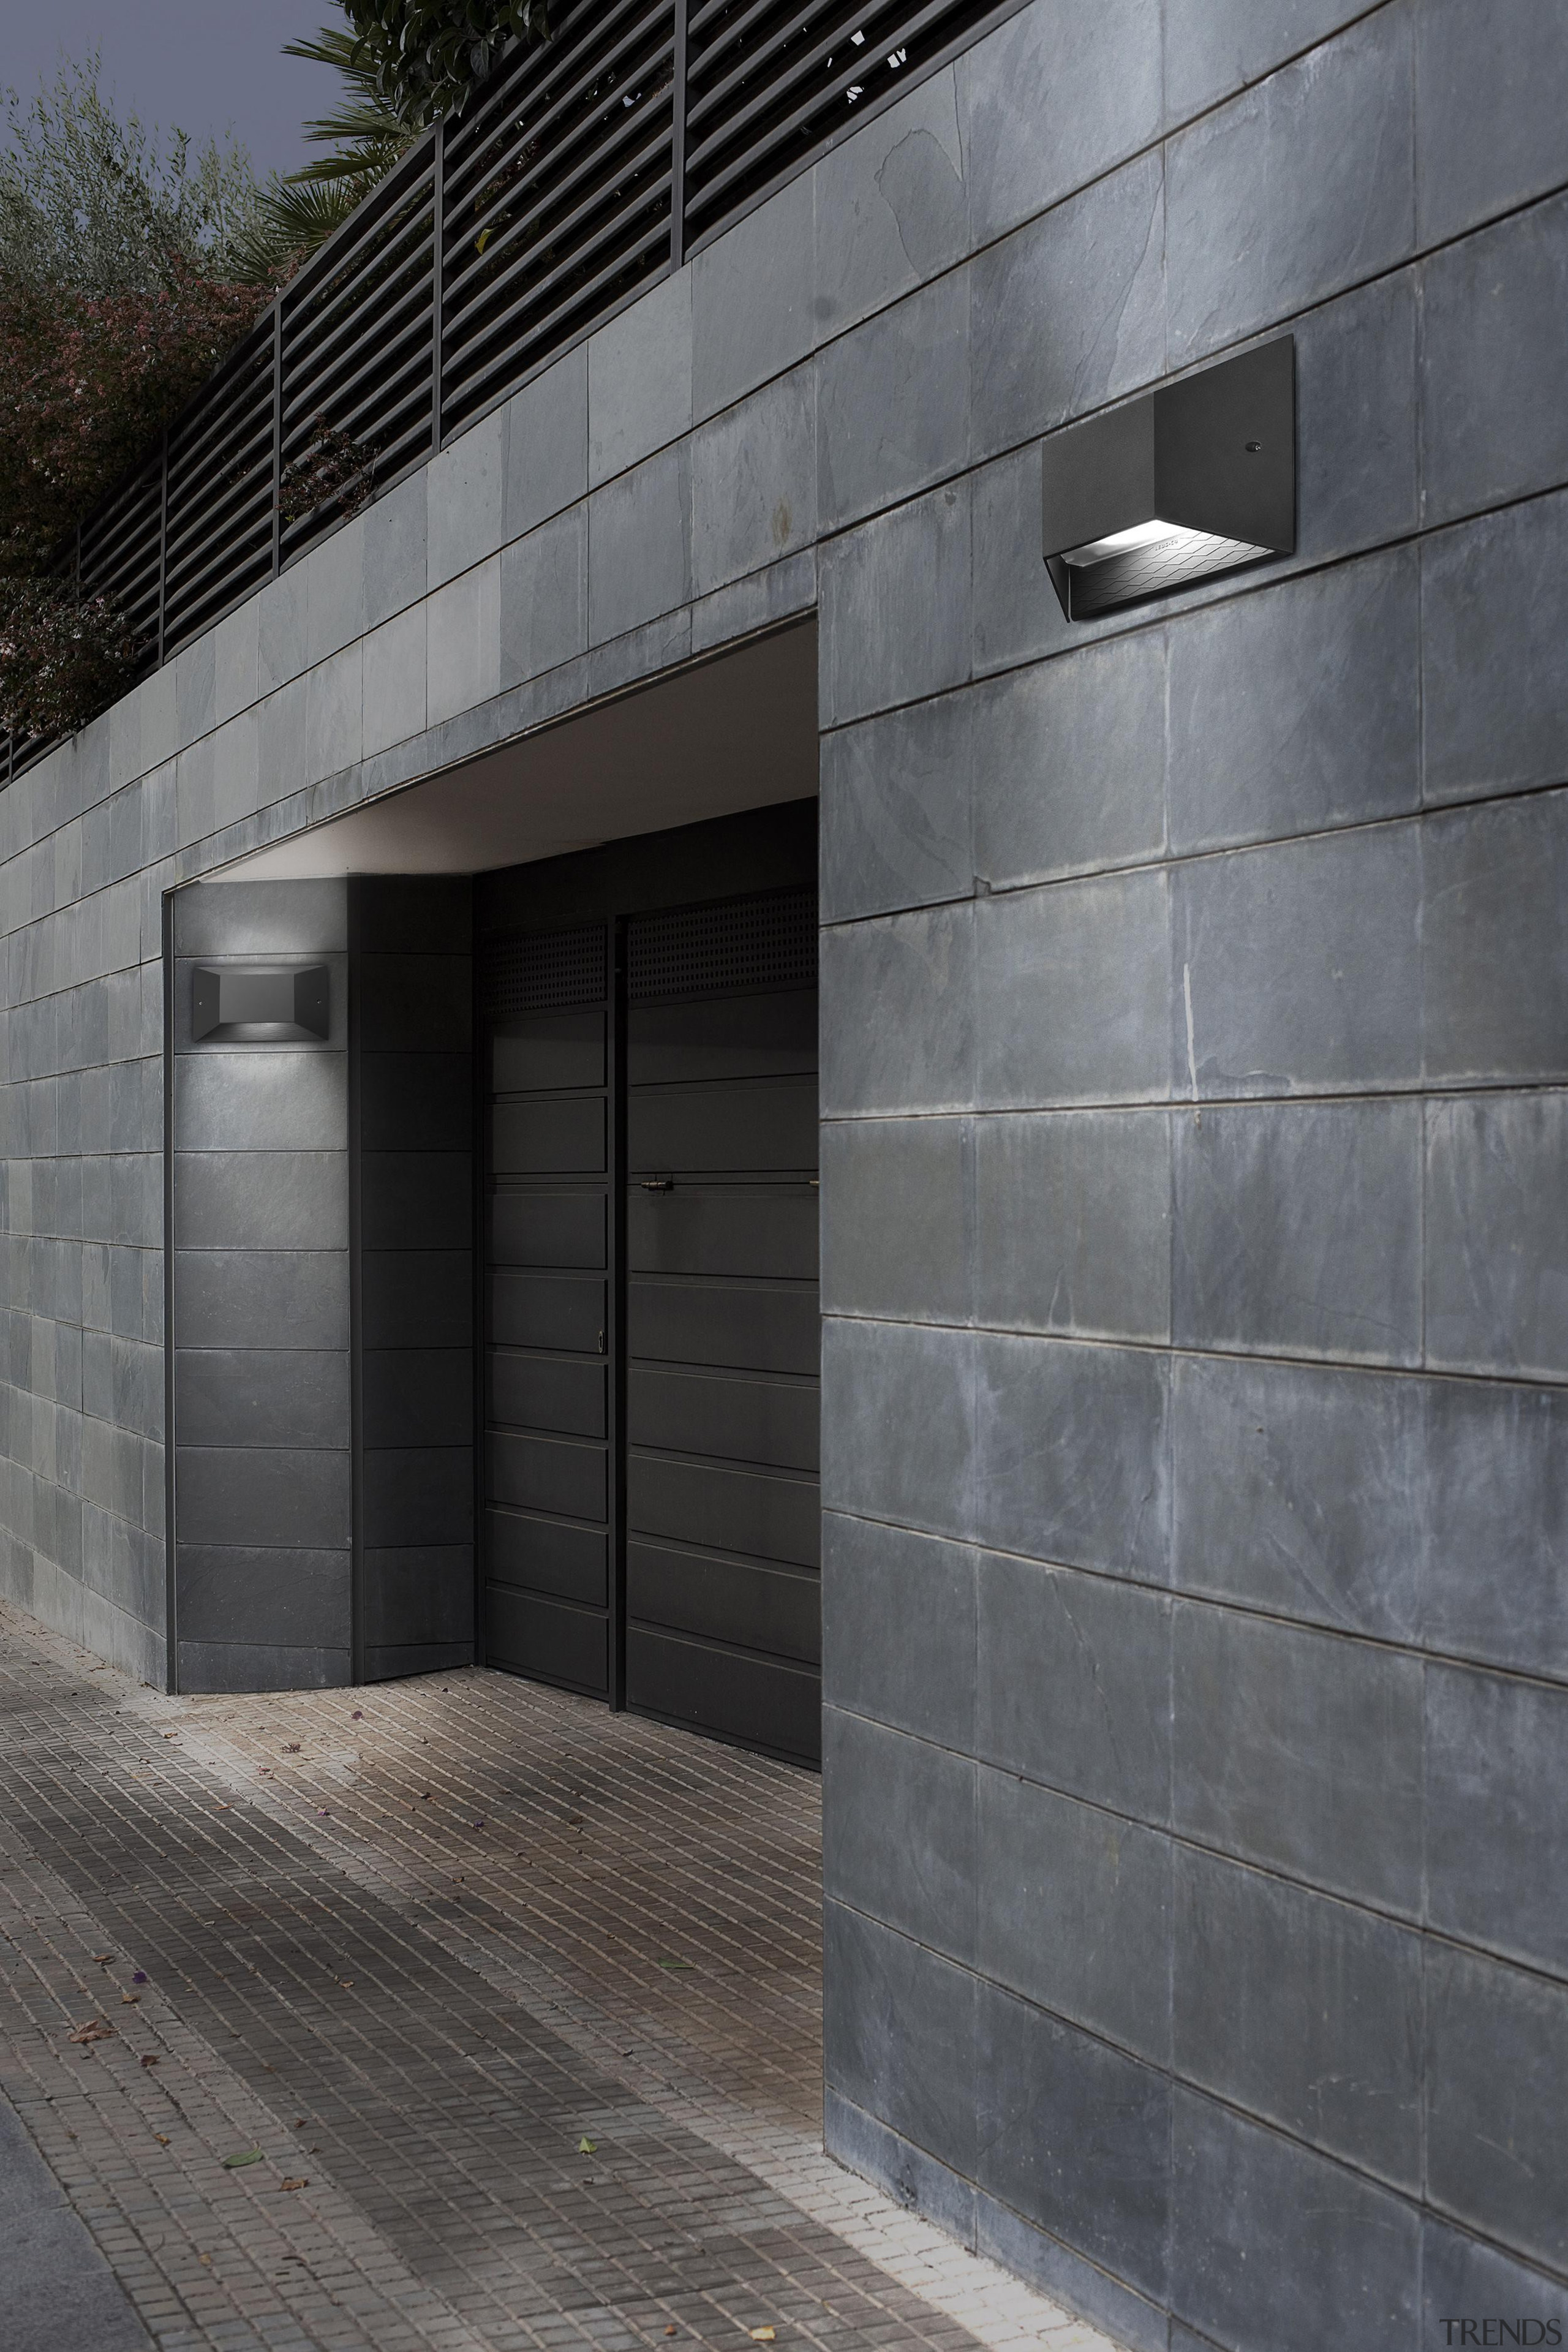 Exterior and Outdoor Lights - Exterior and Outdoor architecture, building, facade, wall, window, gray, black